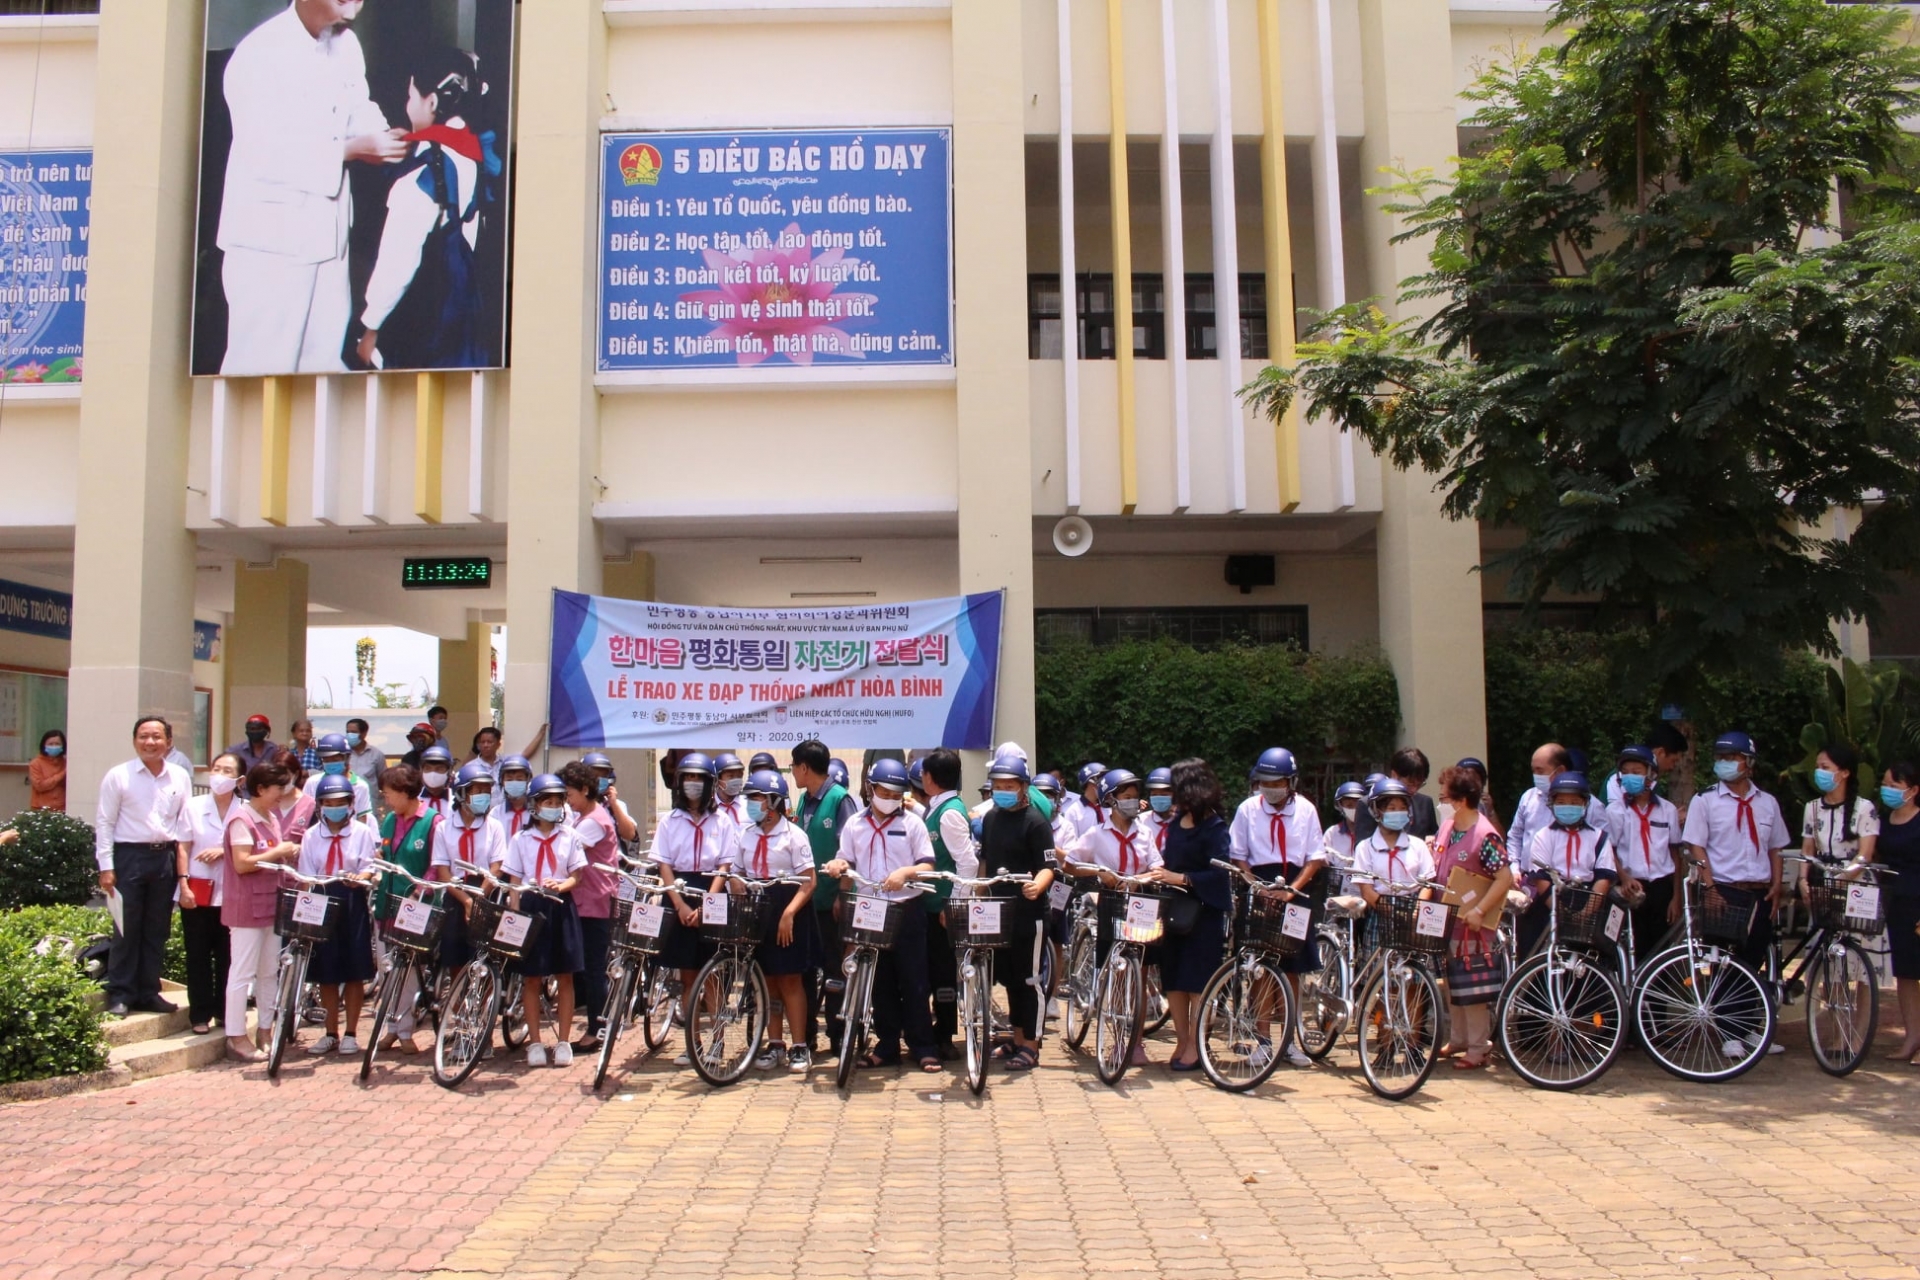 40 bikes for children in Ho Chi Minh city's district